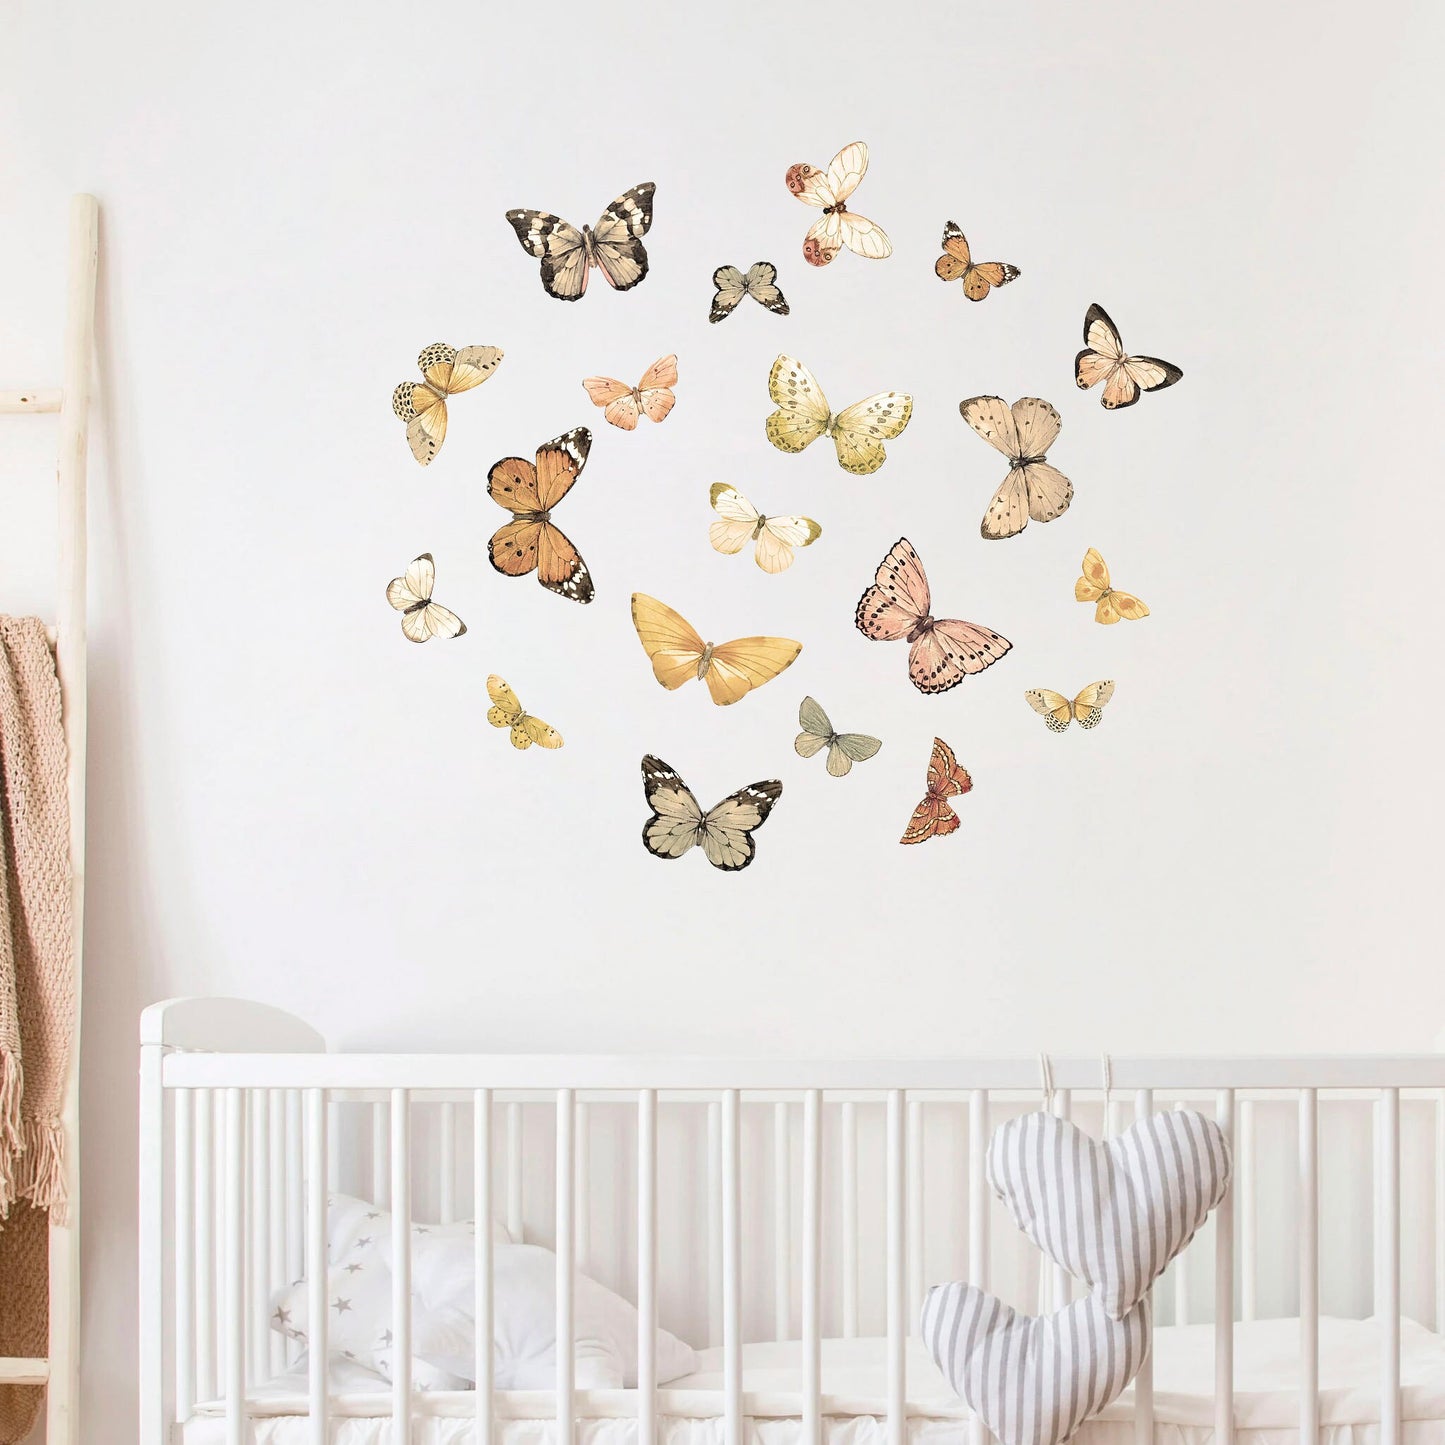 Elegant Mocha Butterfly Wall Decal Set - Assorted Coffee-toned Butterflies in Flight - Perfect for Girls' Room Decor - BR020